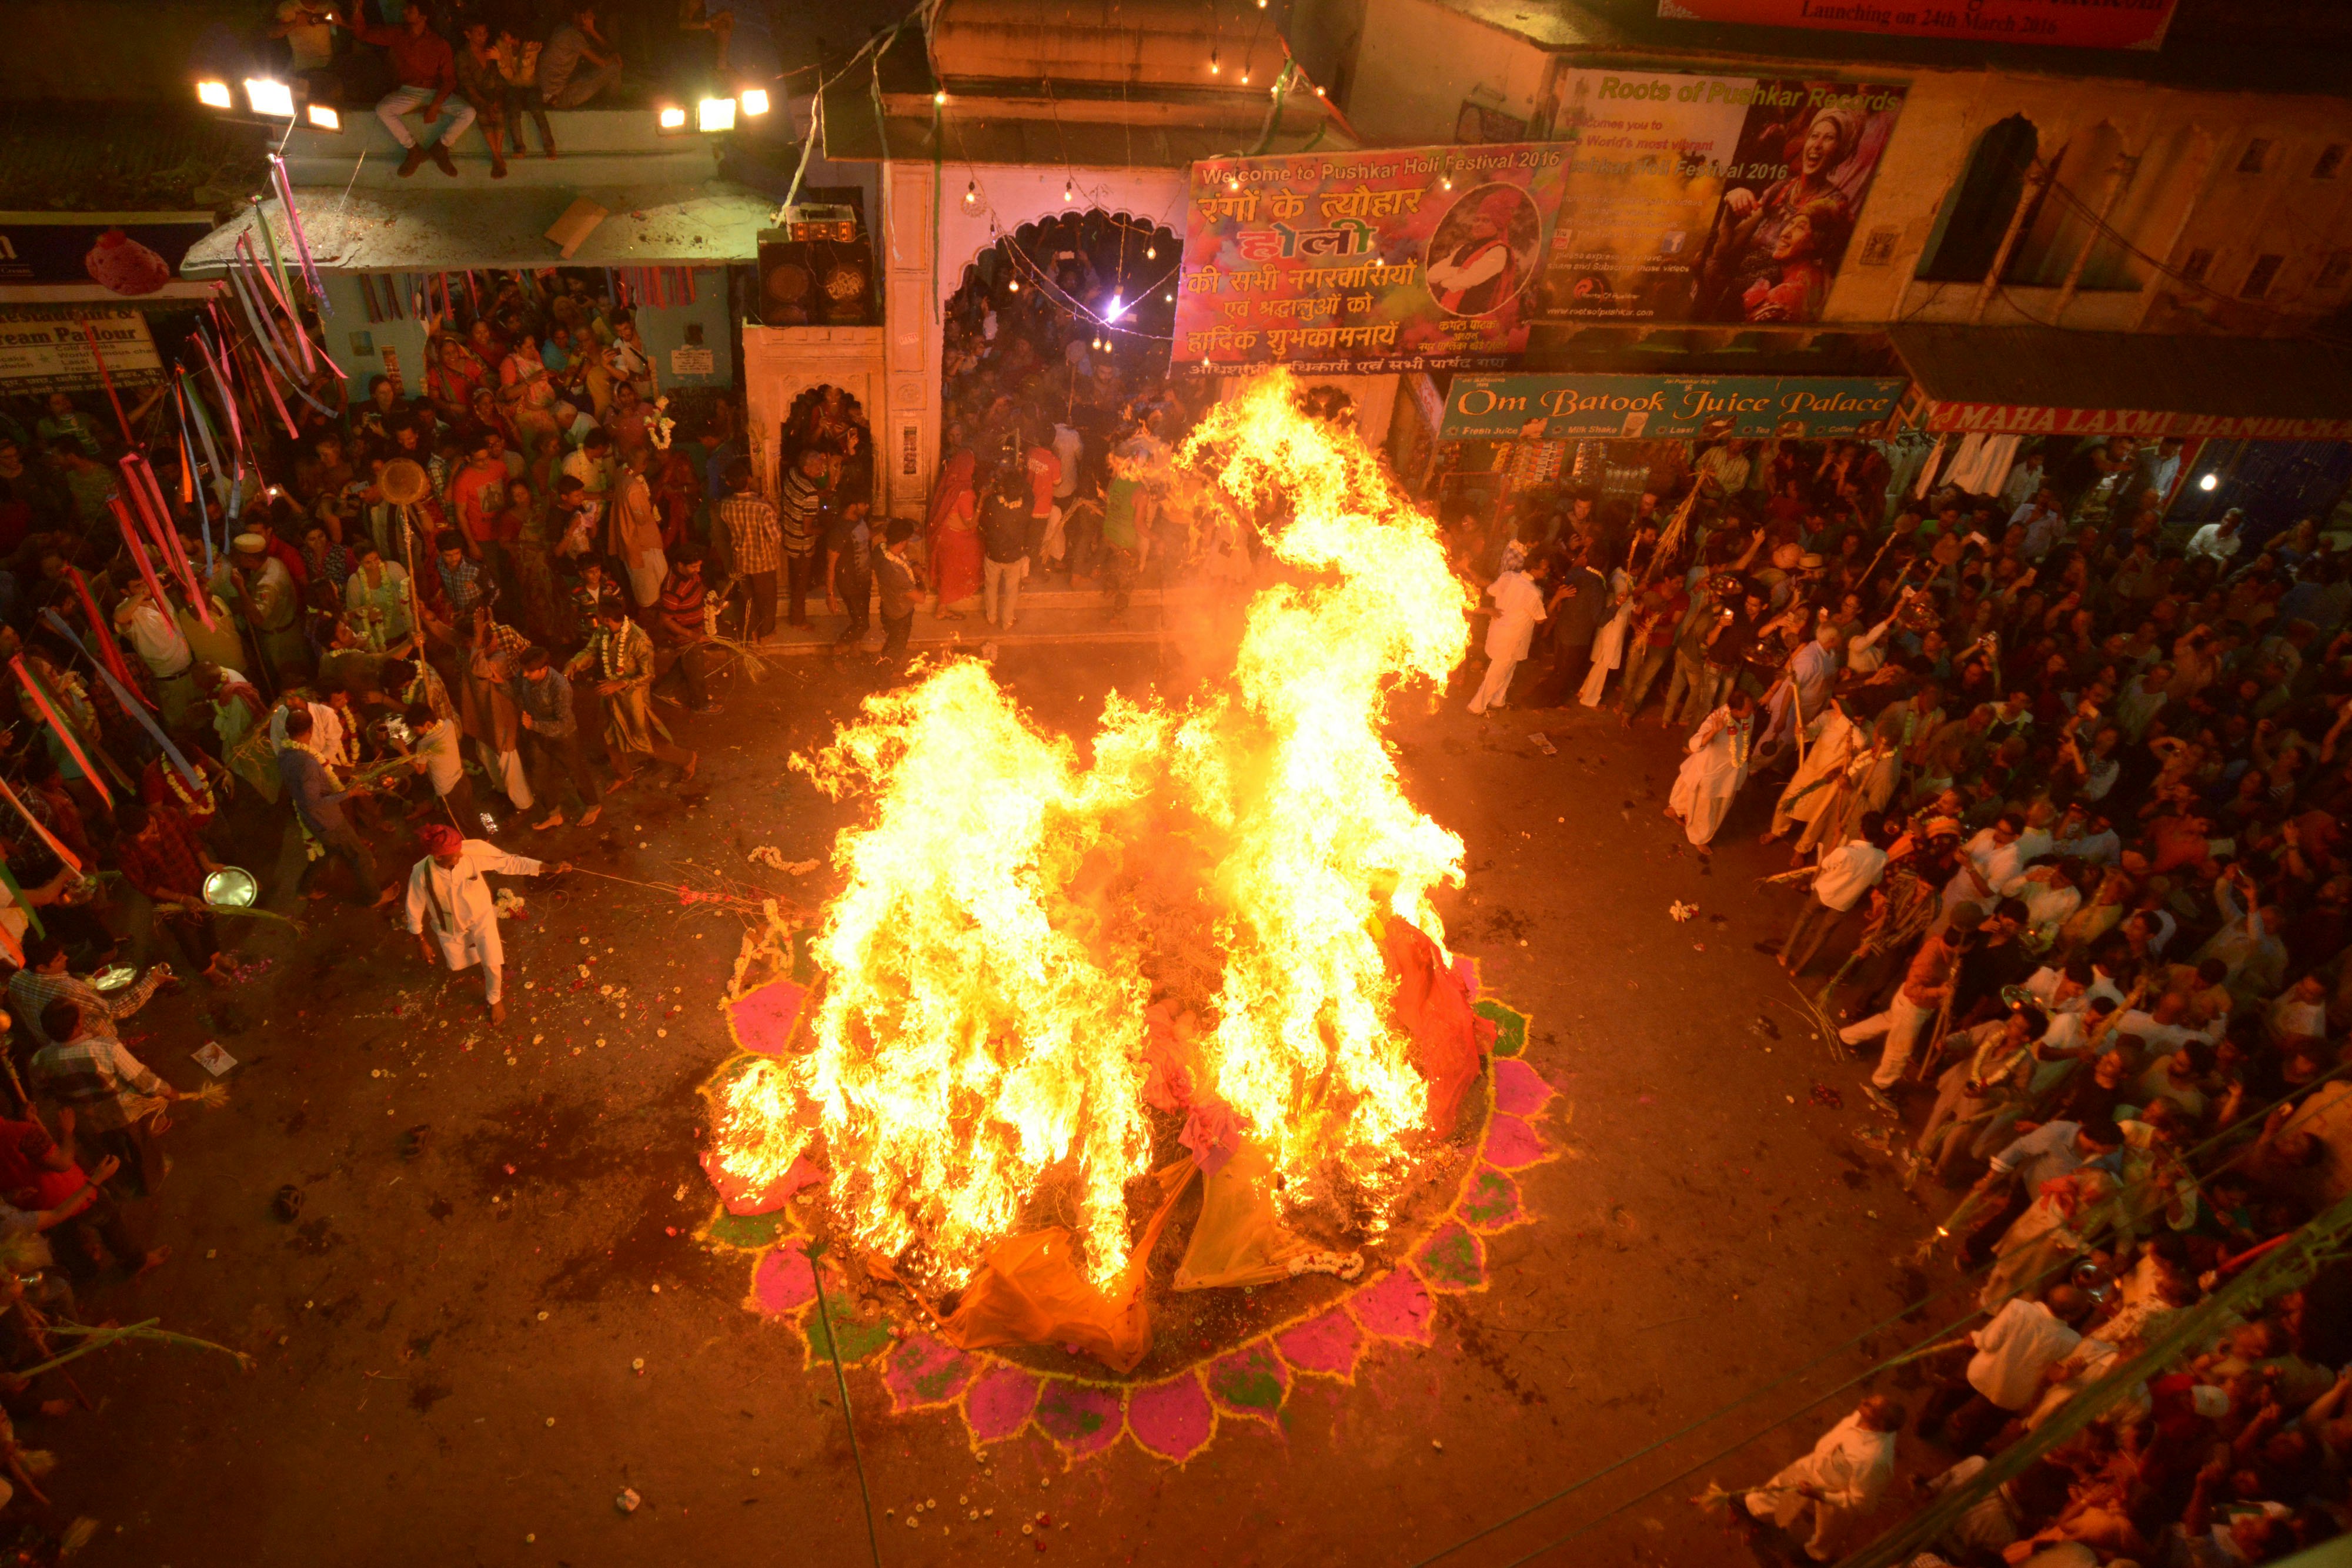 A giant bonfire rages in the middle of a street in Pushkar, India, with crowds circled around it. A man in all white stokes the fire with a long stick.